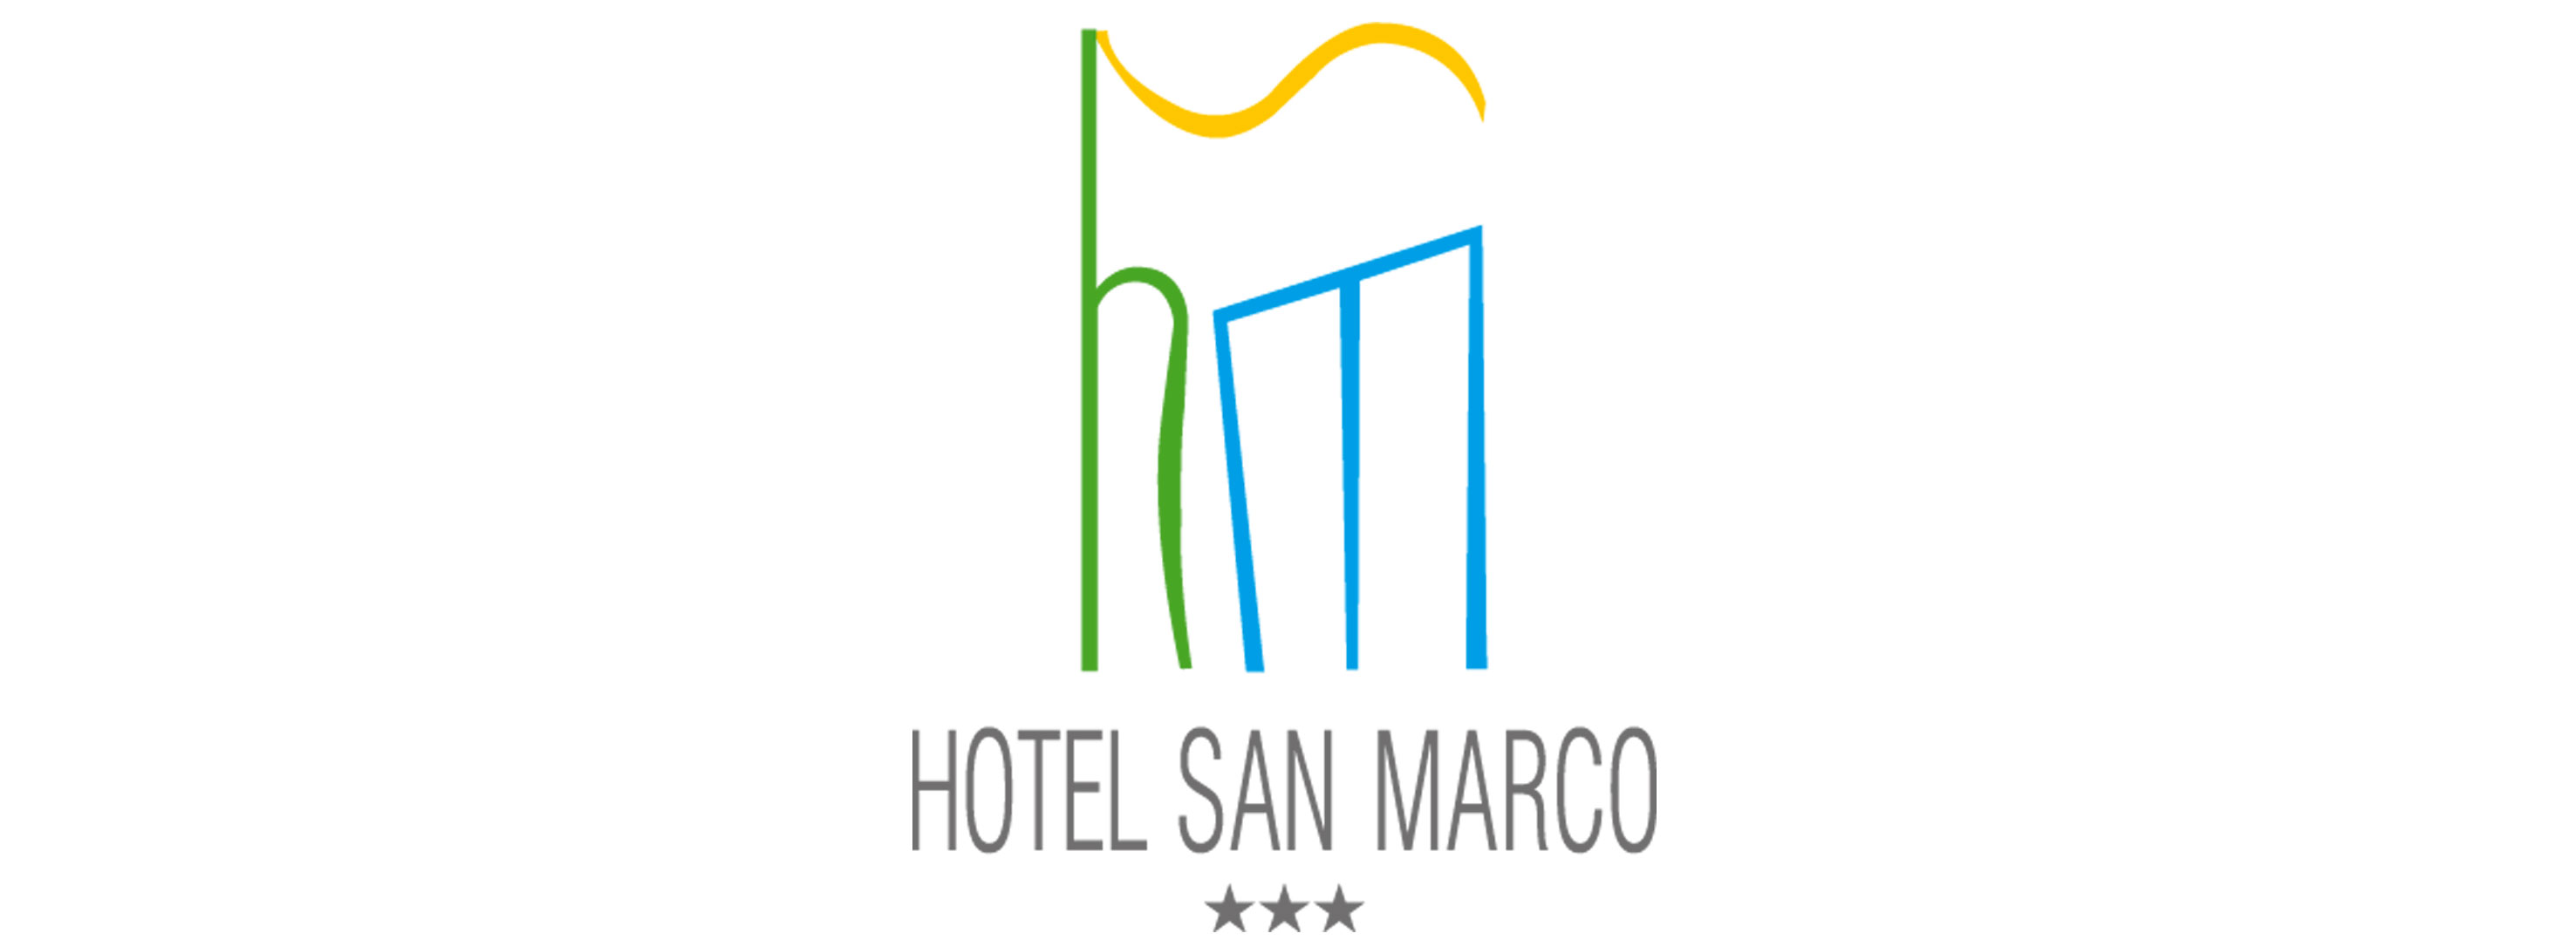 Hotel San Marco Lucca